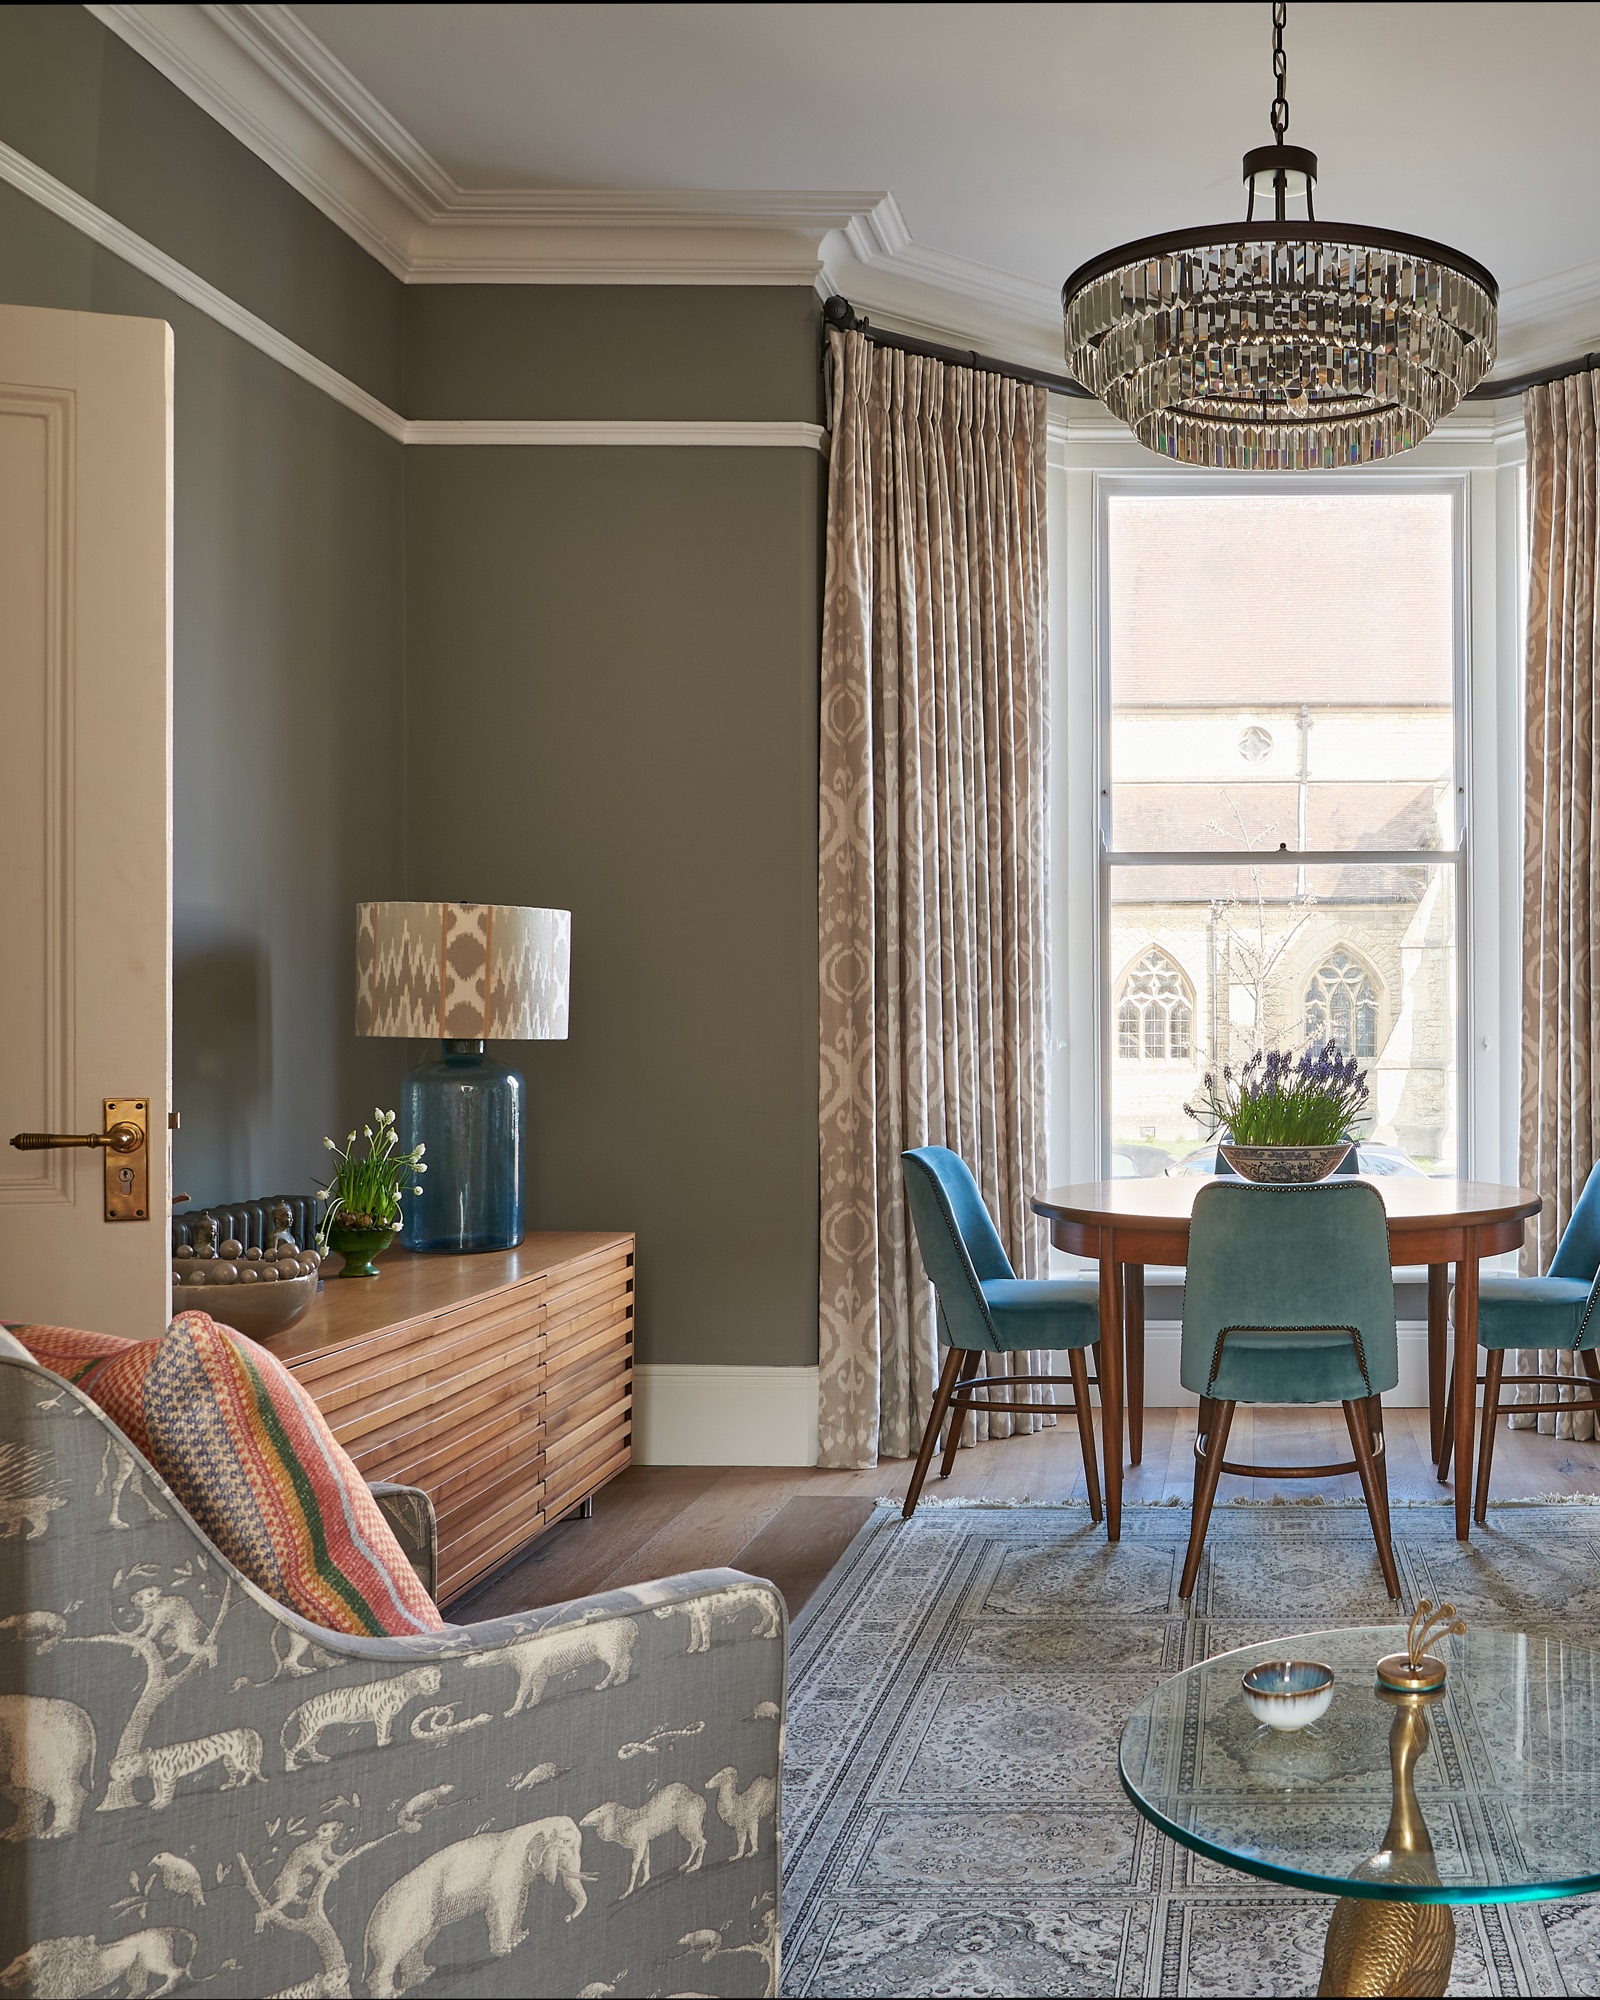 Beautiful Georgian town house painted in worsted farrow and ball, with styled book shelves and  Andrew Martin upholstered armchairs and cushions. Vintage dining table with bespoke dining chairs.